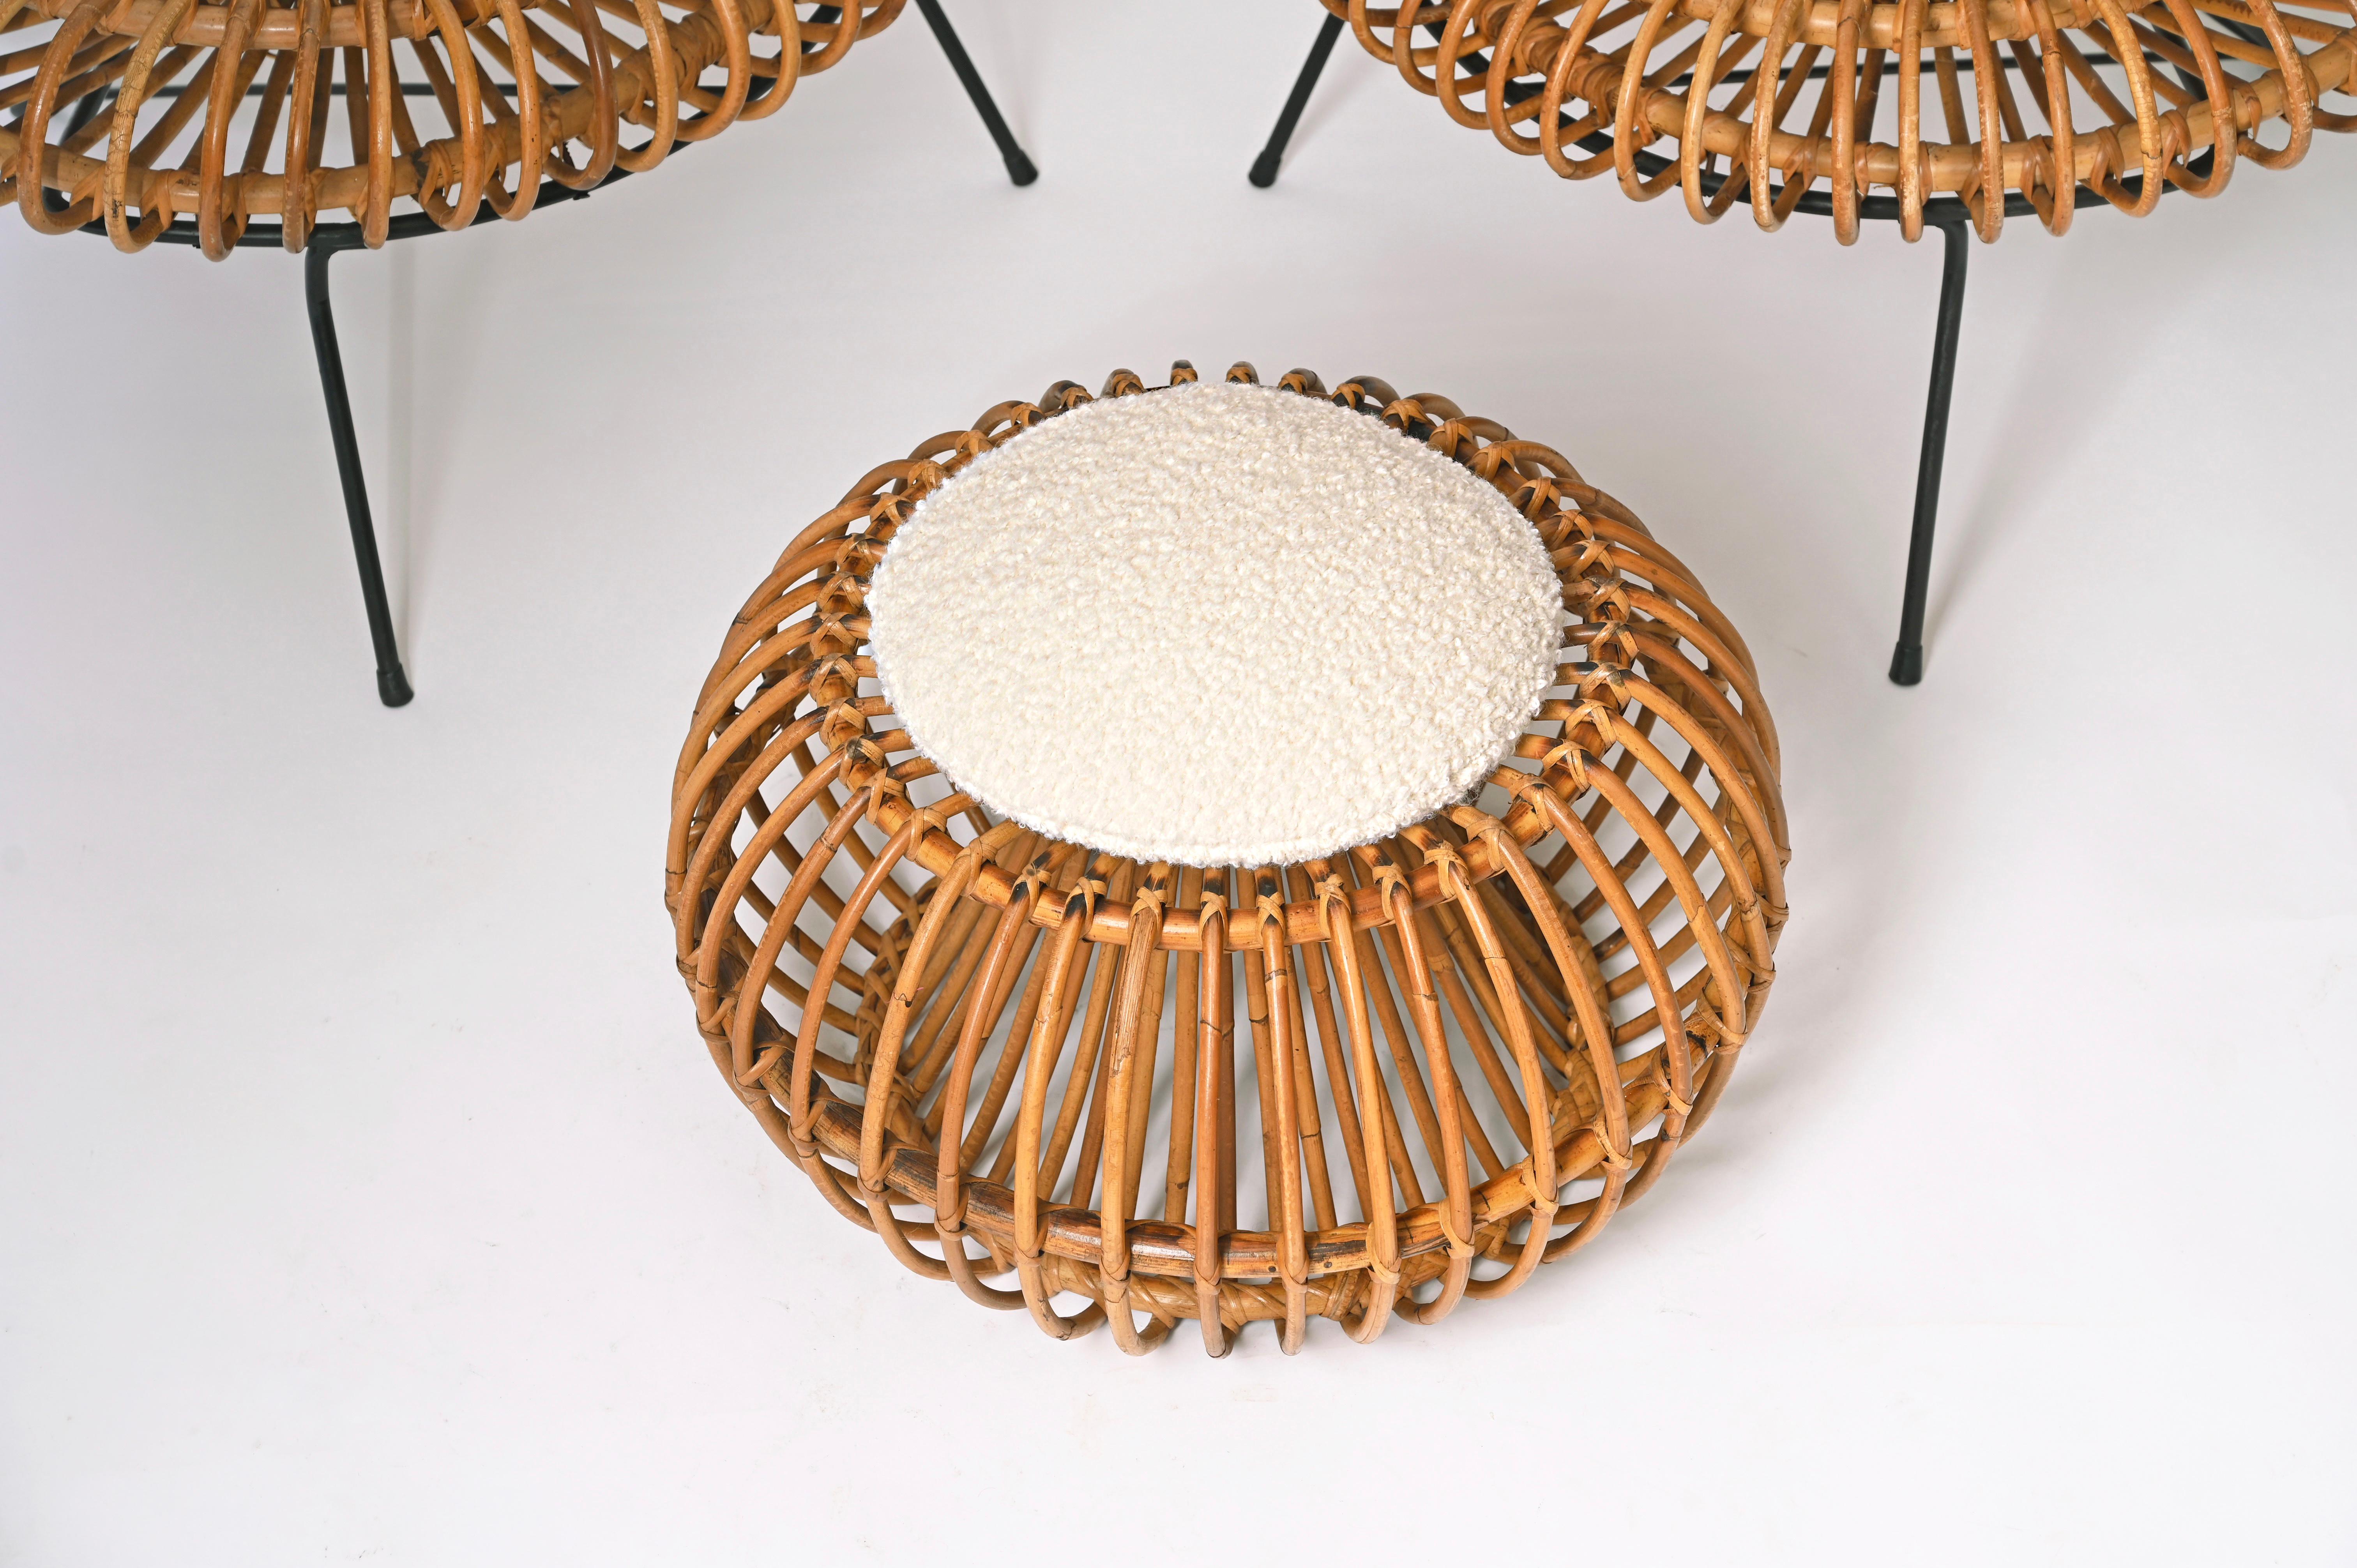 Living Room Rattan Set by Janine Abraham & Dirk Jan Rol - Chairs, Pouf, Mirror  For Sale 7